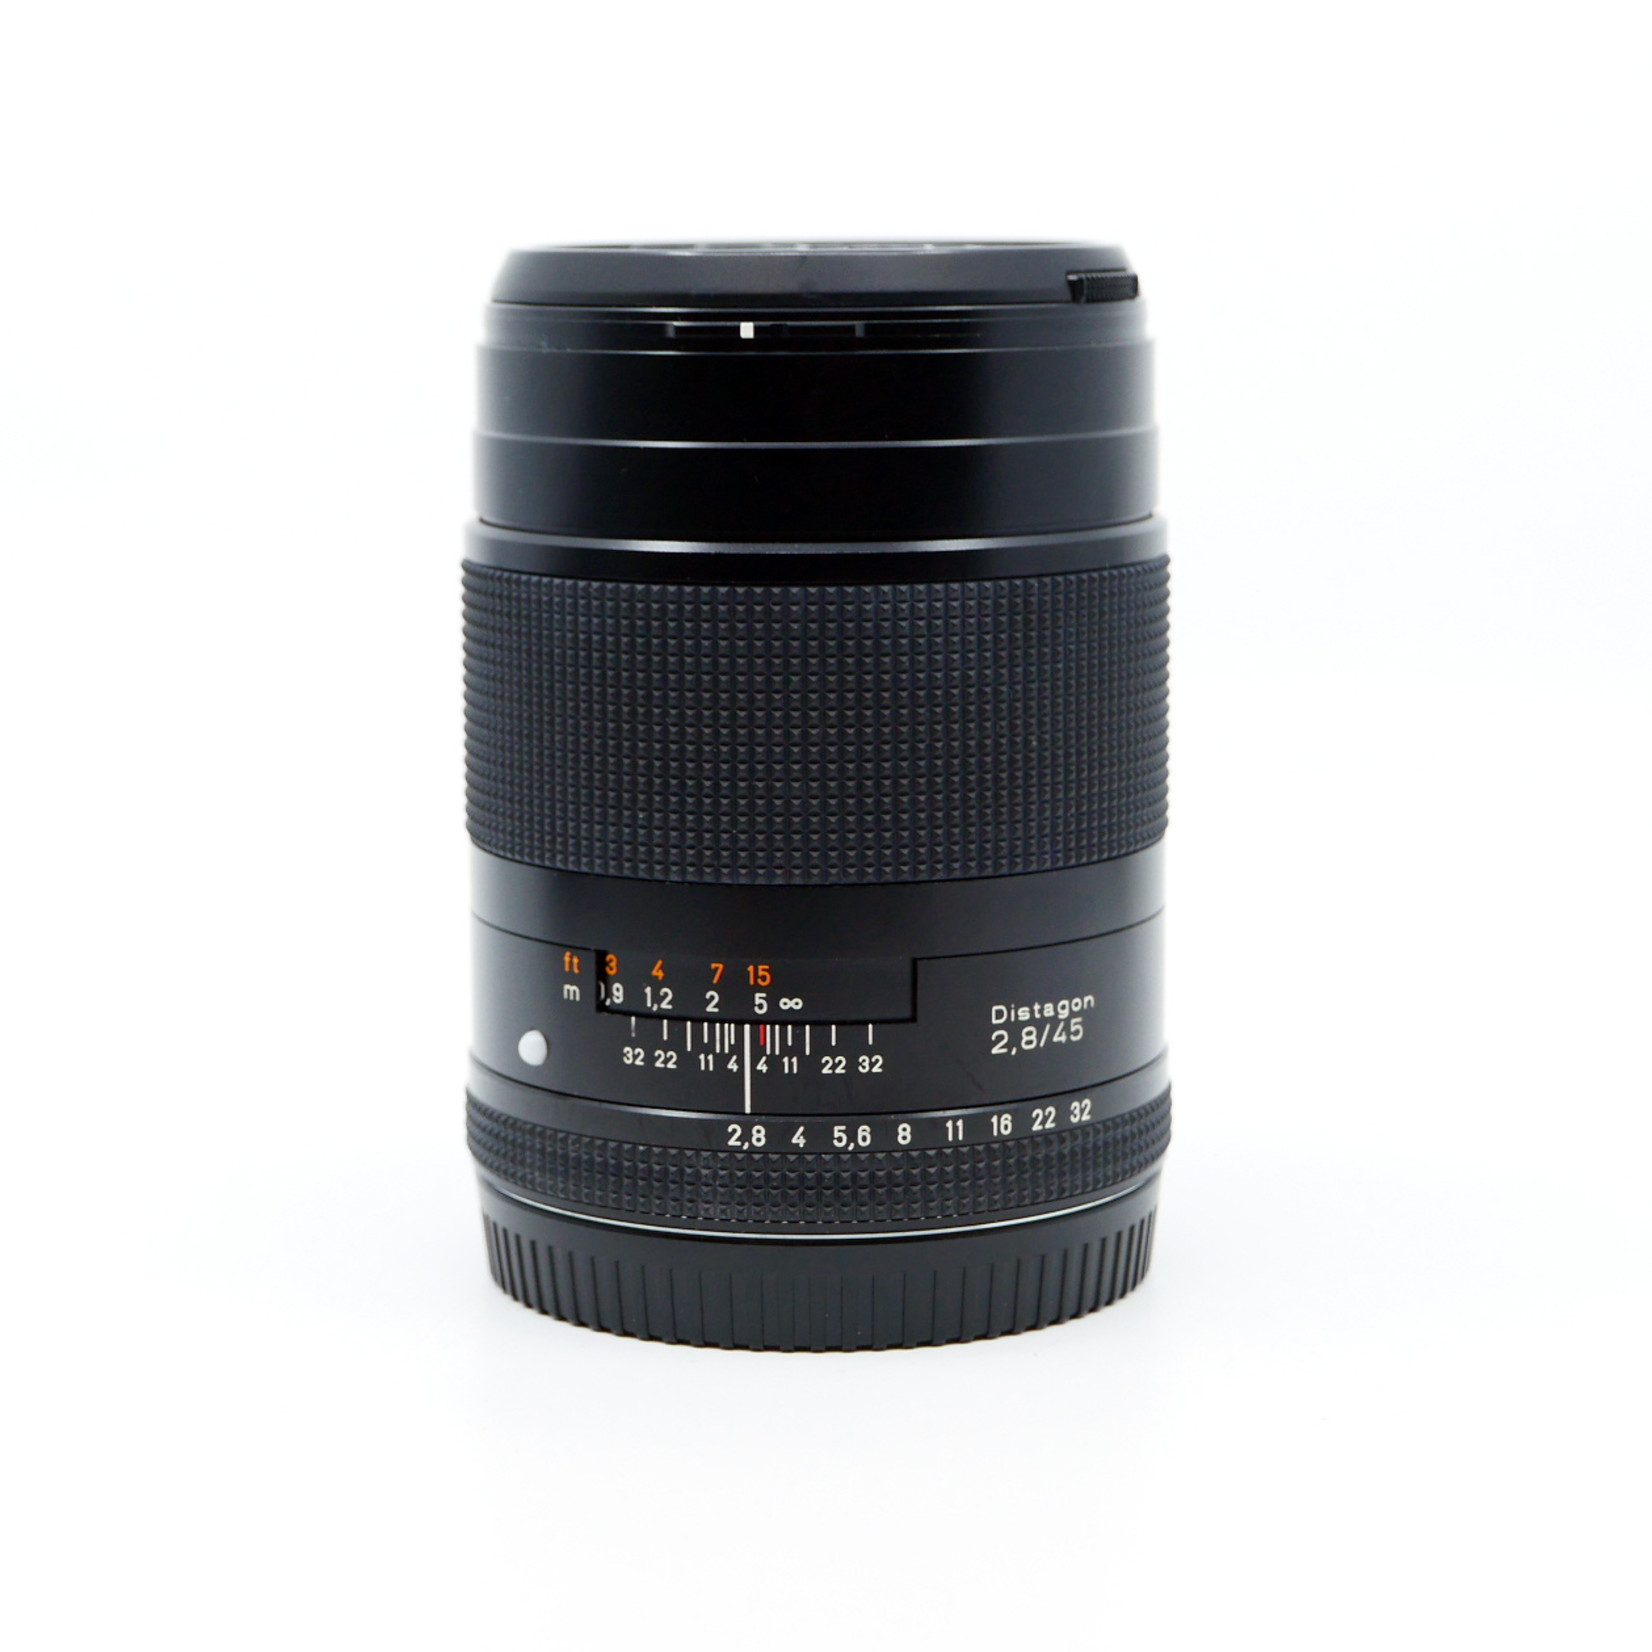 Zeiss 45mm f/2.8 Distagon T* for Contax 645 (Used) - Pro Photo